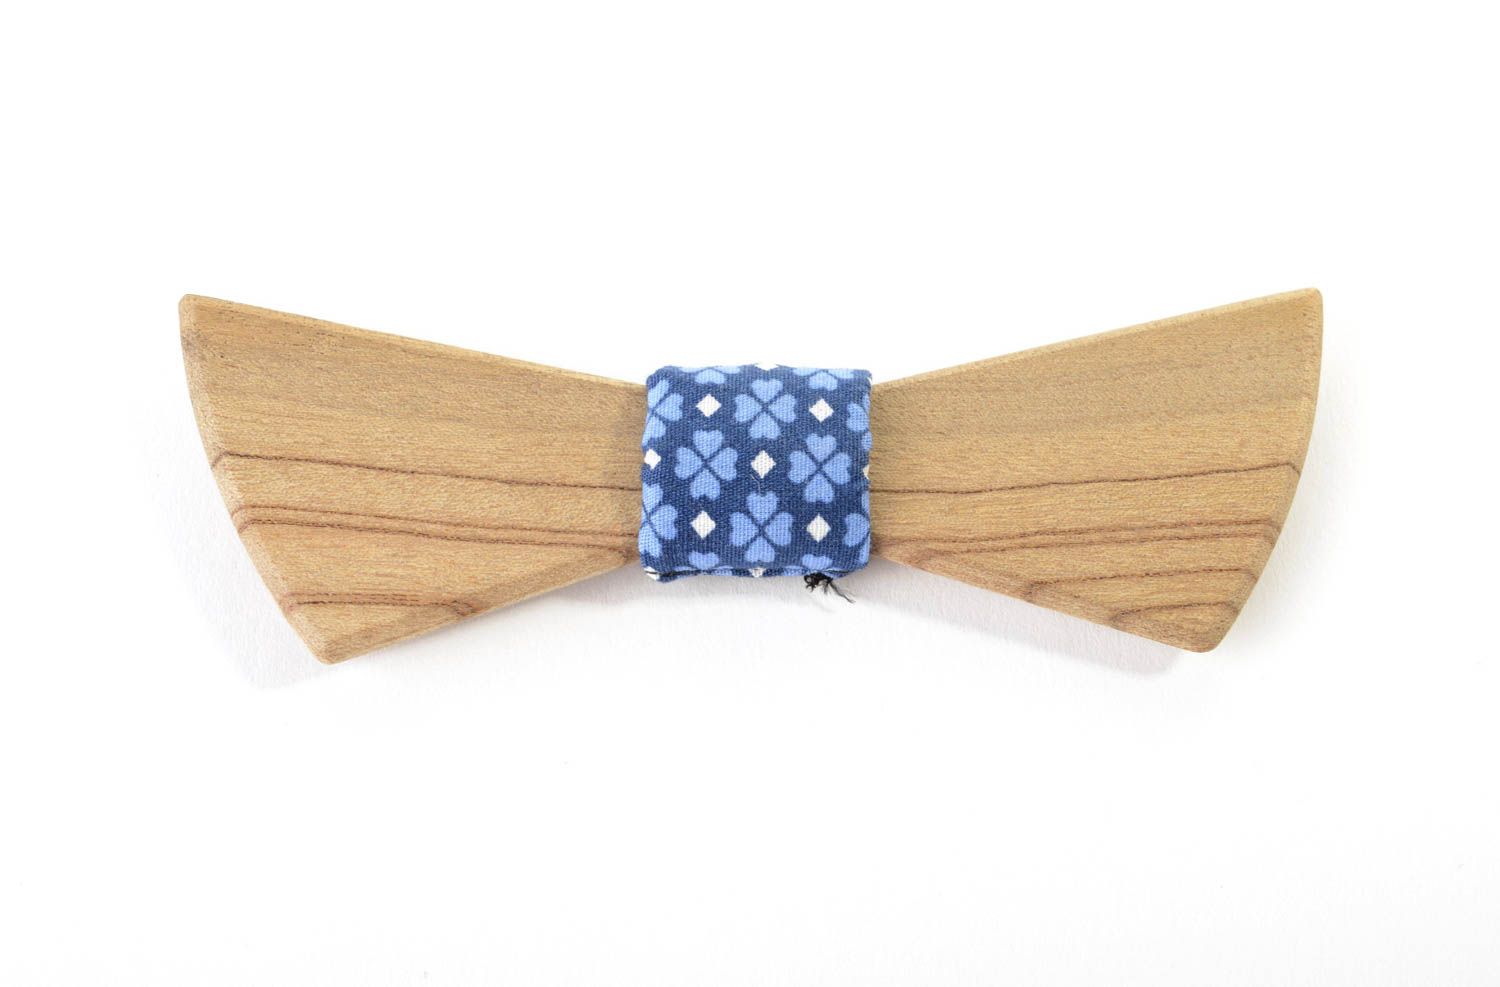 Handmade bowtie for men wooden and textile bow tie stylish bow tie for men photo 4